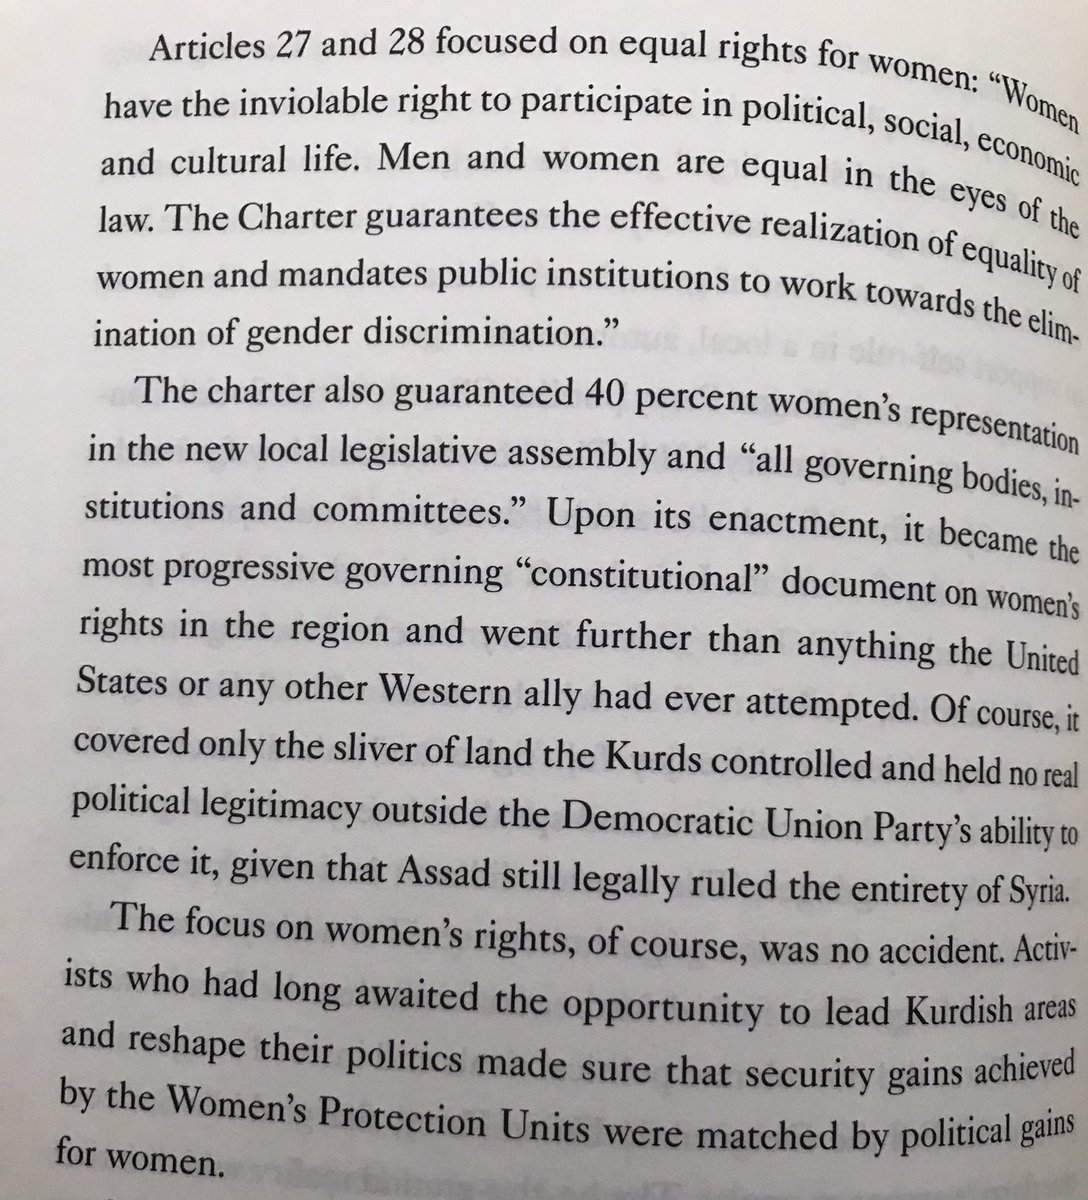 Making this point—that these laws and institutions aren’t just more progressive than the rest of the region is on women’s rights, but more progressive than virtually all of the world is—is important. Especially for a Western audience.